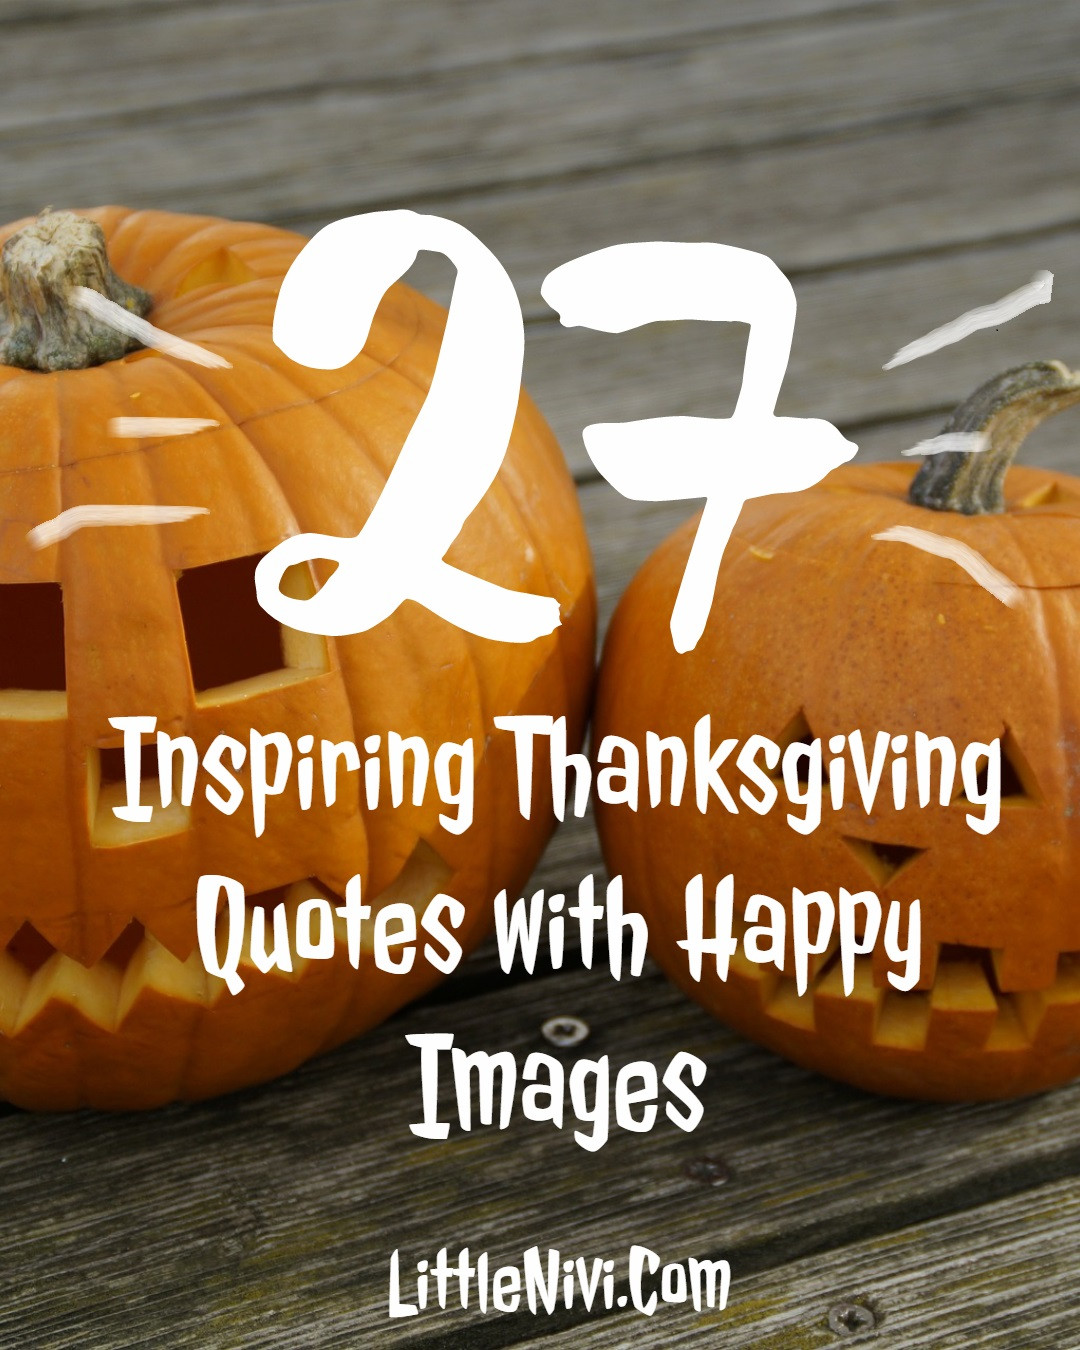 Thanksgiving Quotes Spiritual
 27 Inspiring Thanksgiving Quotes with Happy